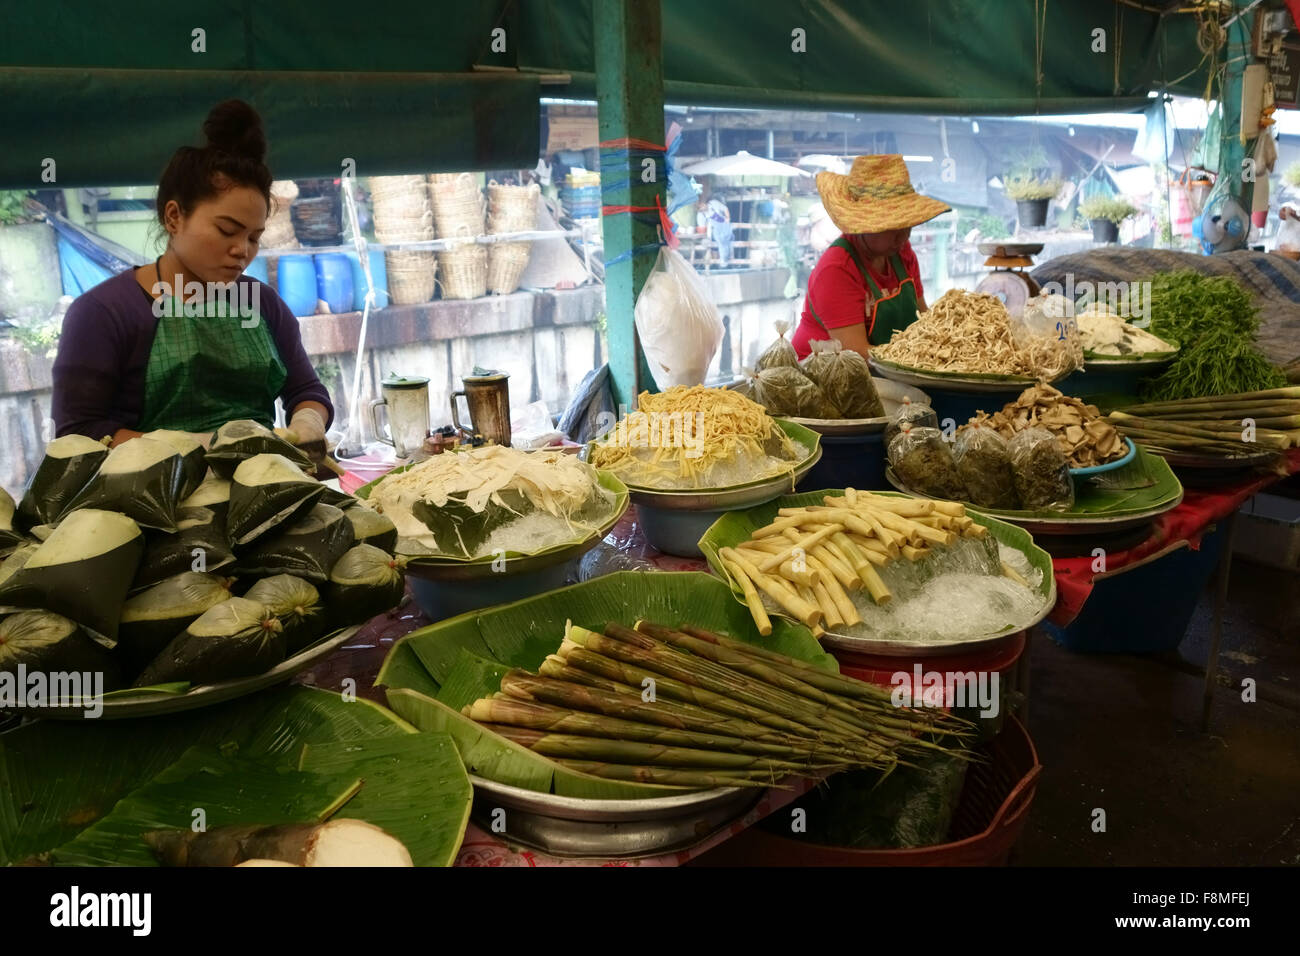 Neatly prepared and displayed vegetable produce in a covered Thai food market in Bangkok Stock Photo